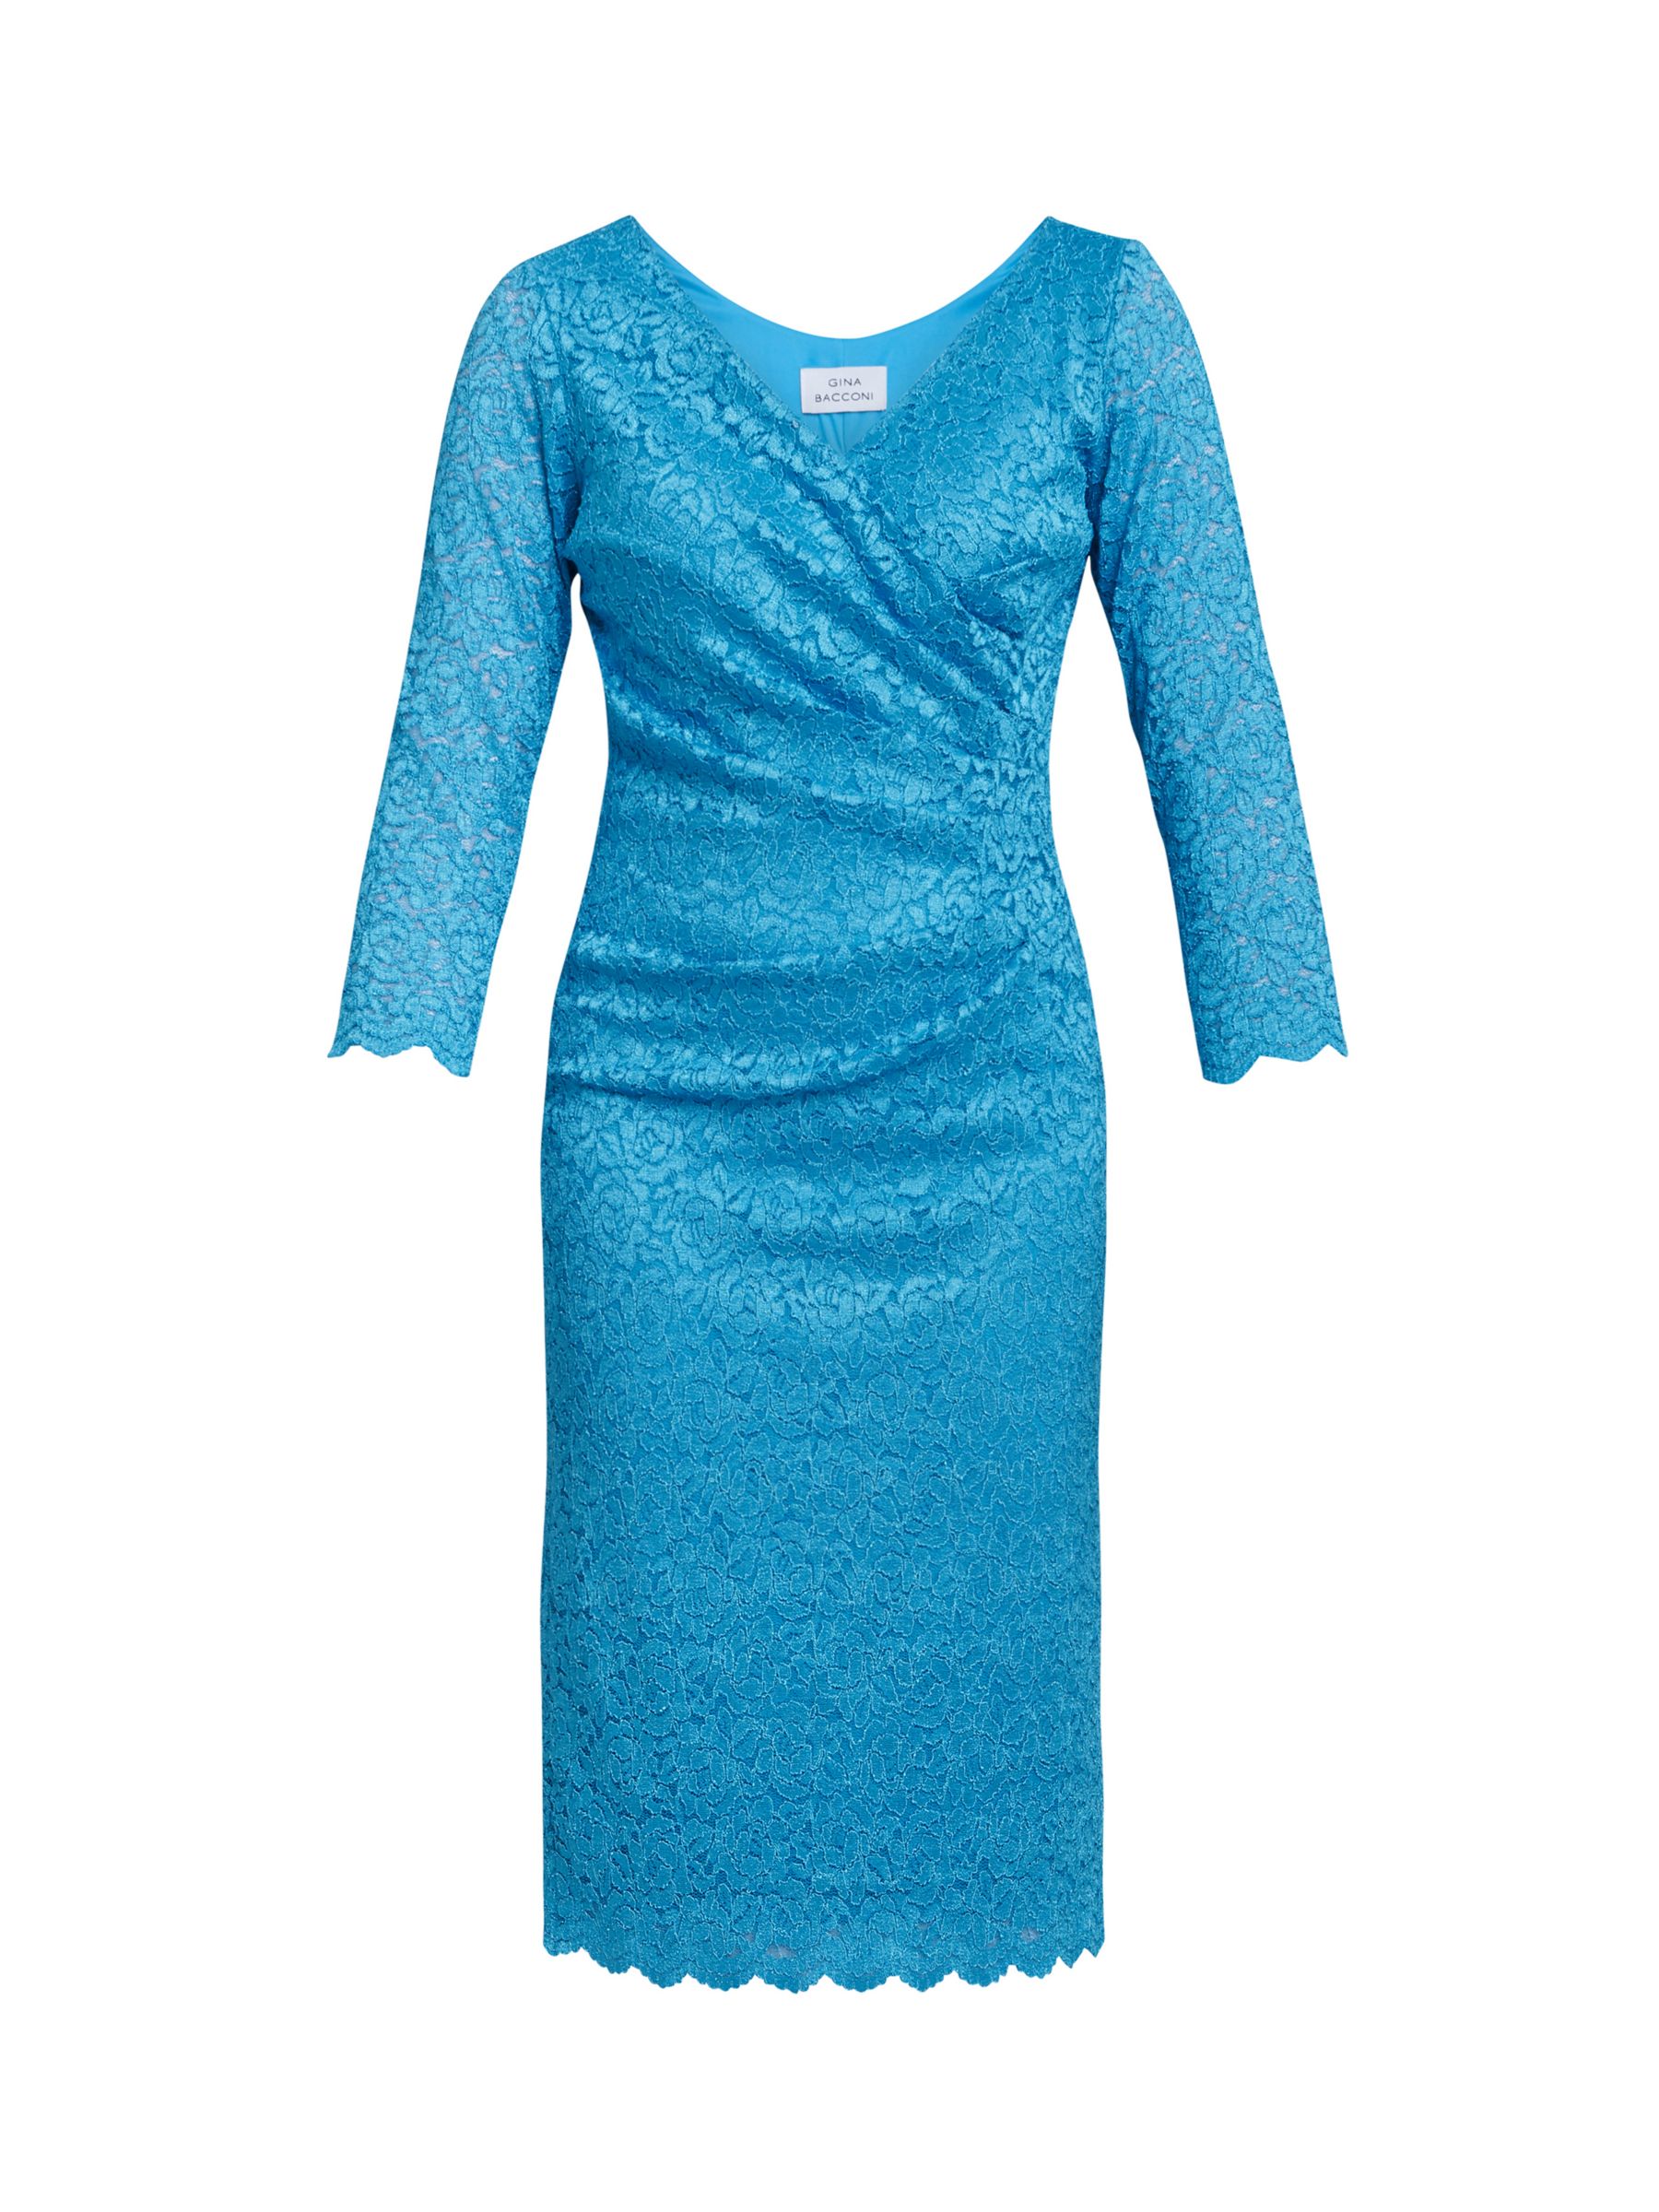 Buy Gina Bacconi Melody Lace Wrap Dress, Turquoise Online at johnlewis.com